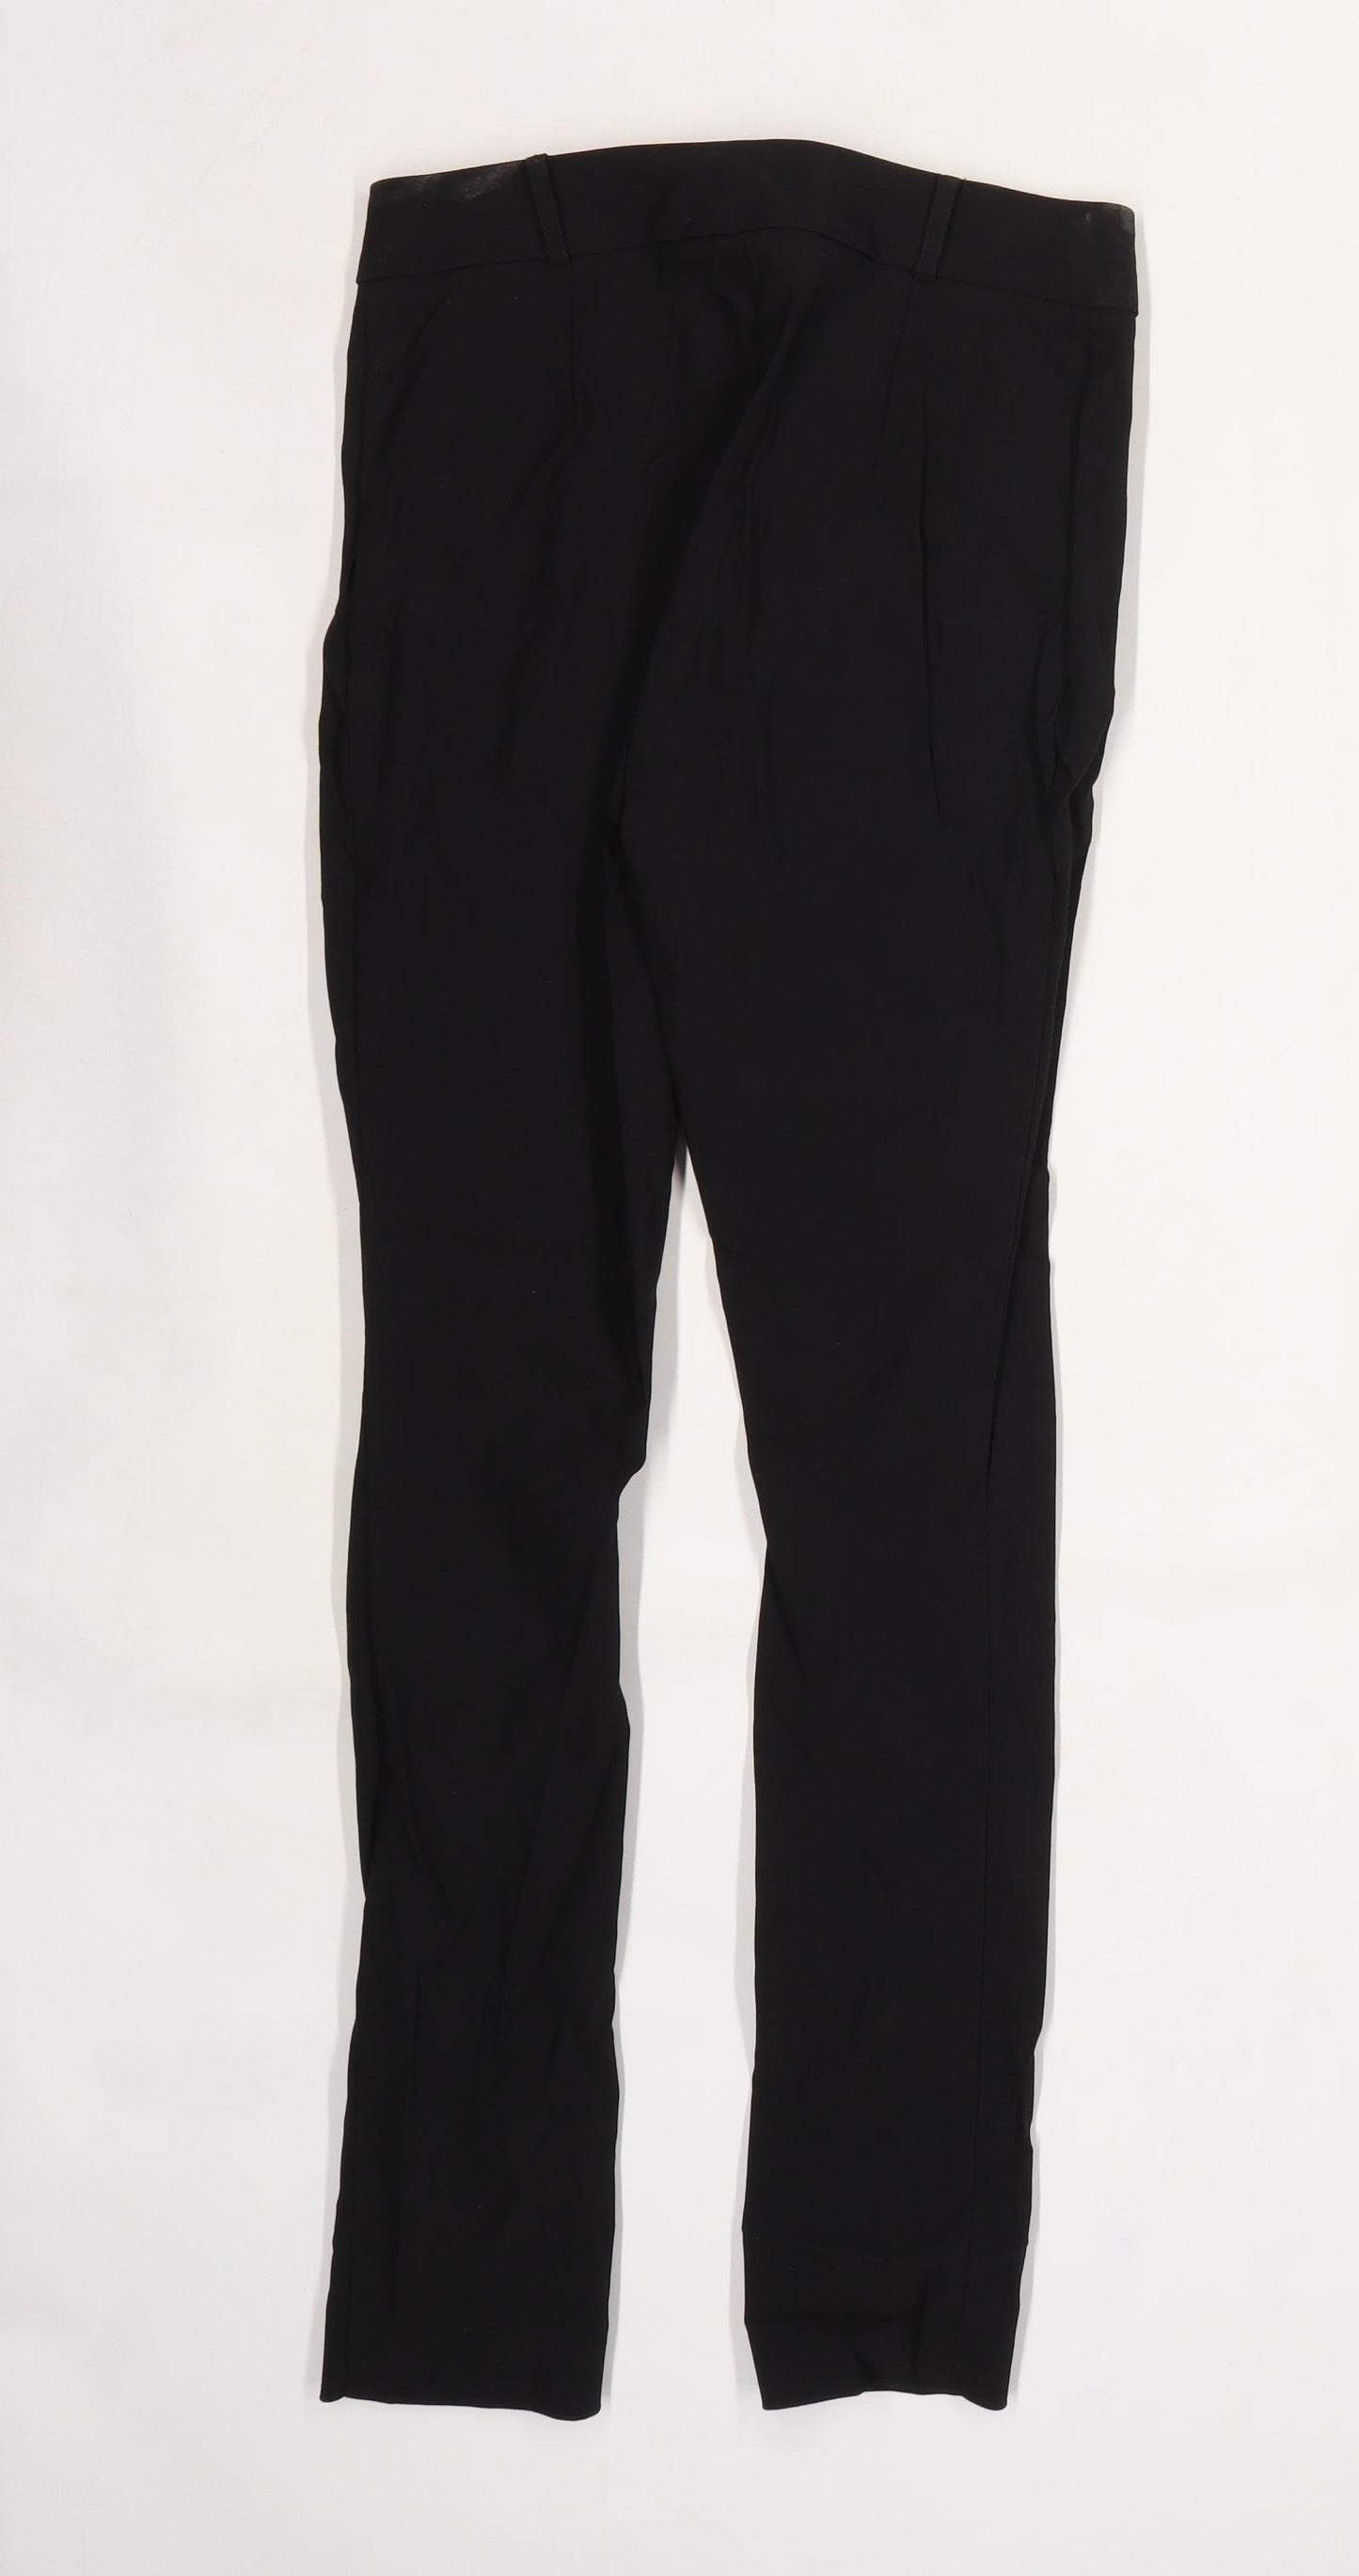 New Look Girls Black  Rayon Dress Pants Trousers Size 12 Years